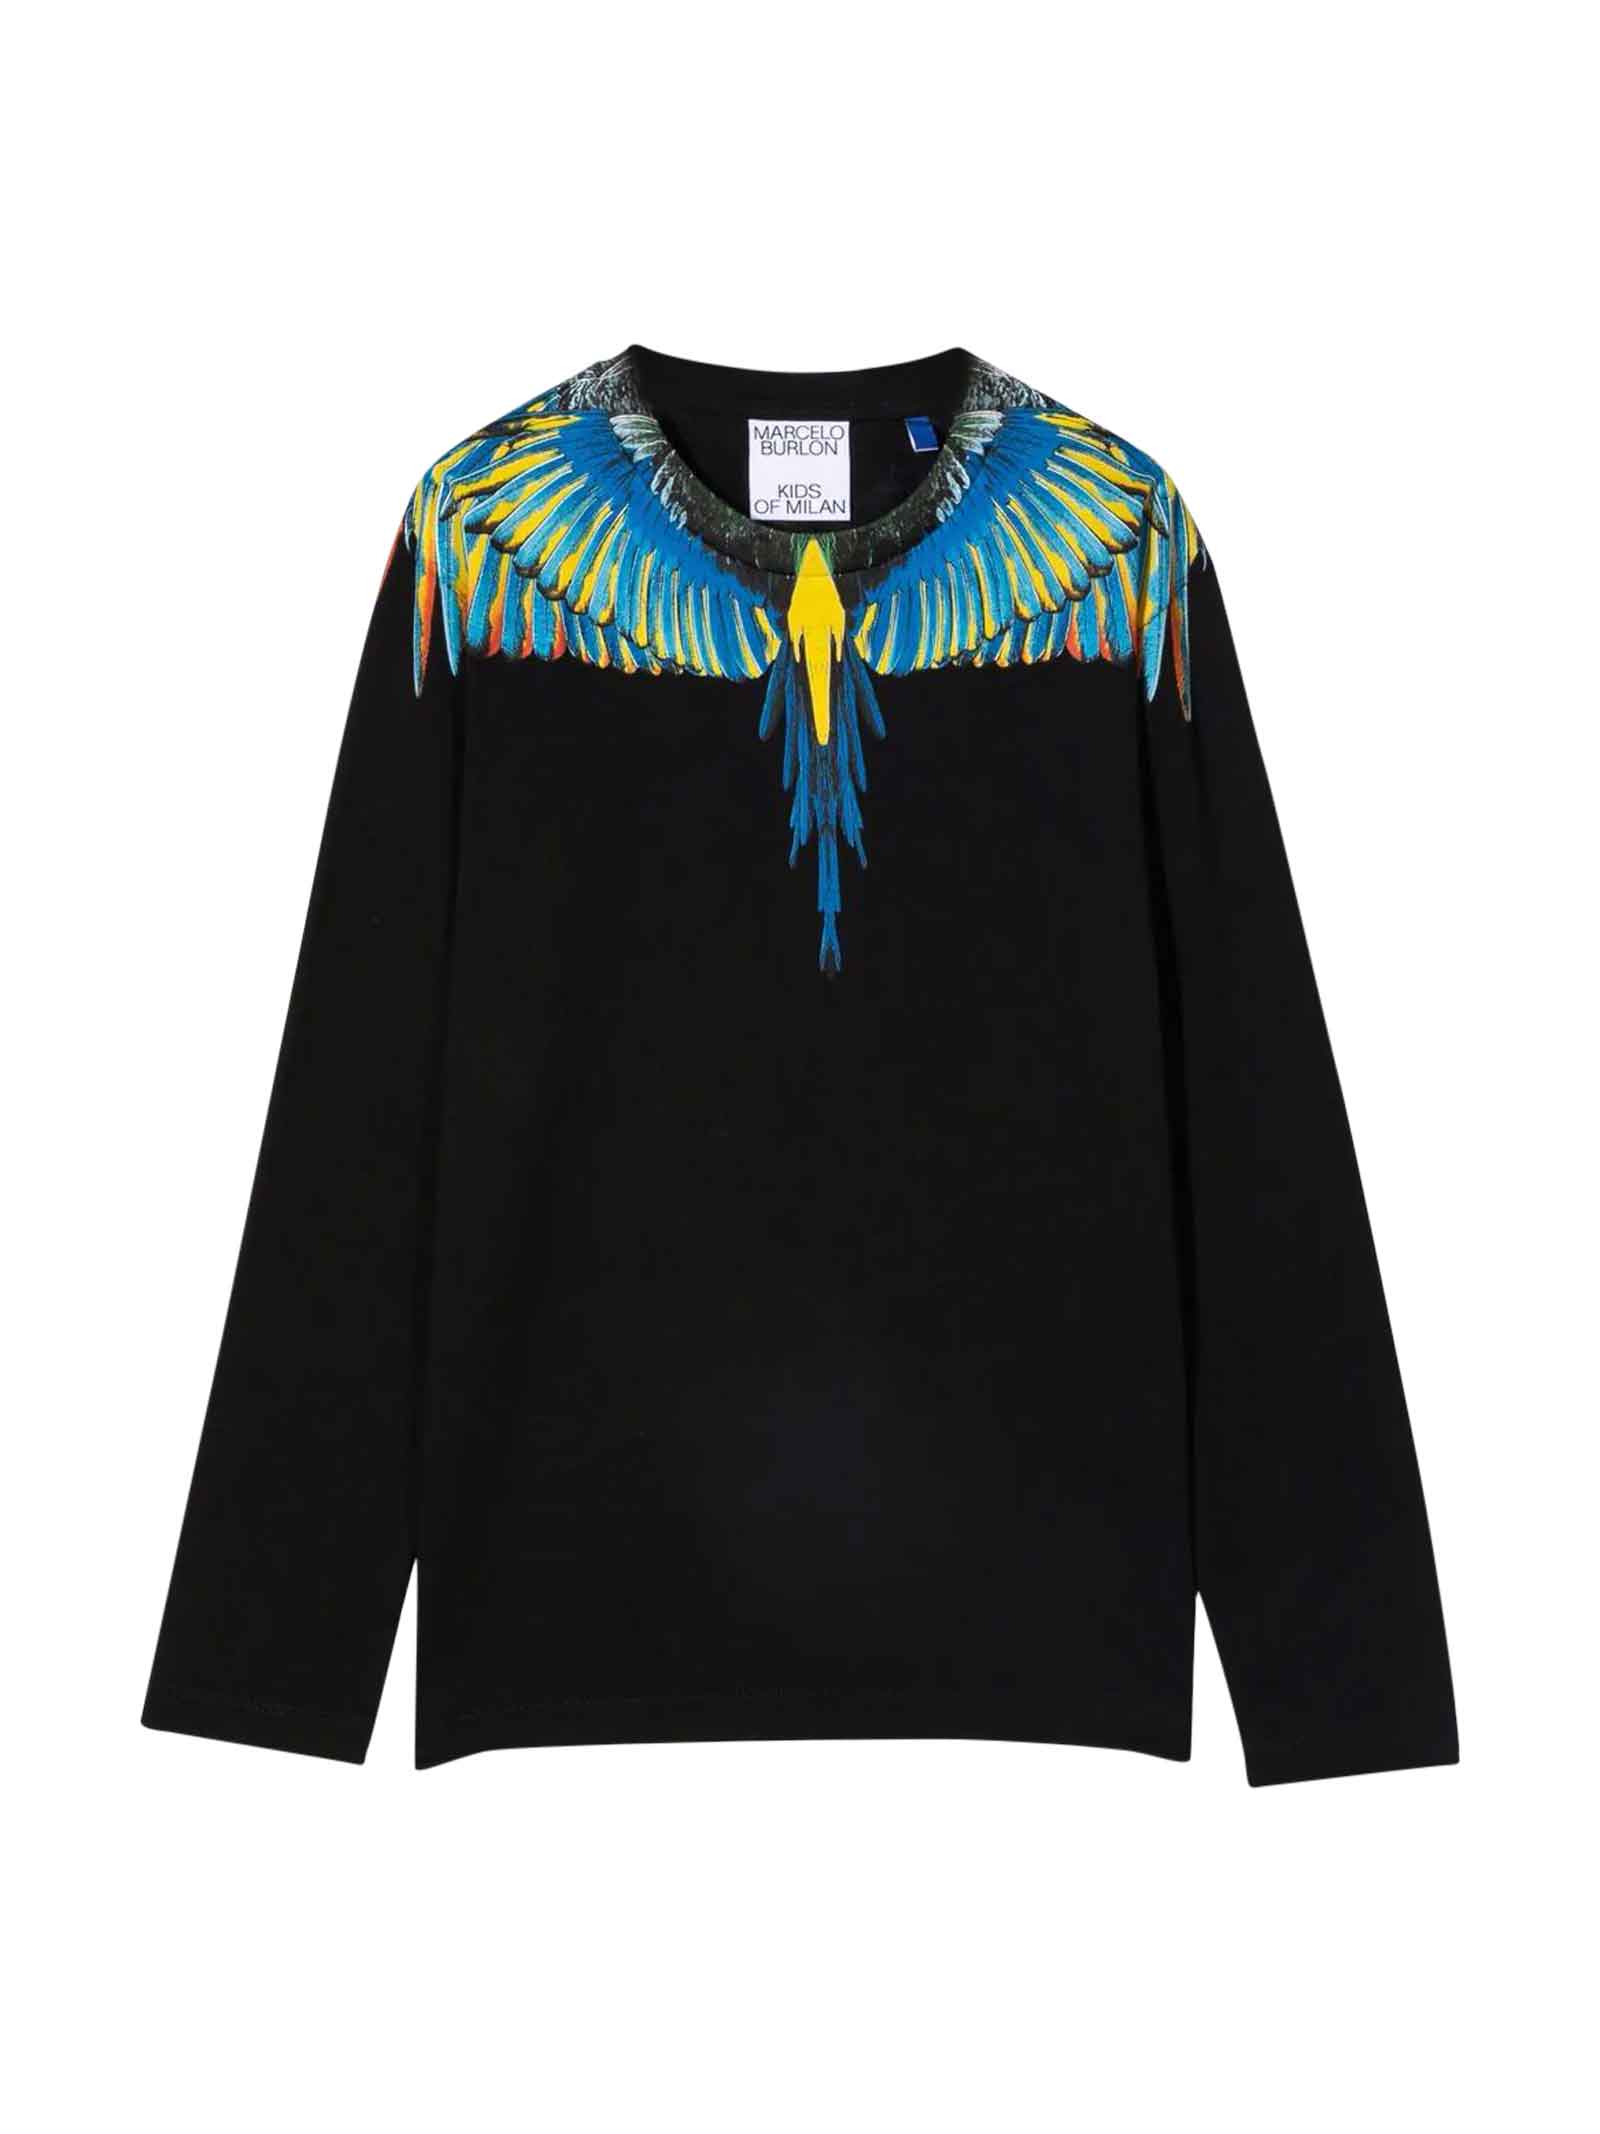 Marcelo Burlon Black T-shirt With Long Sleeves And Multicolor Print